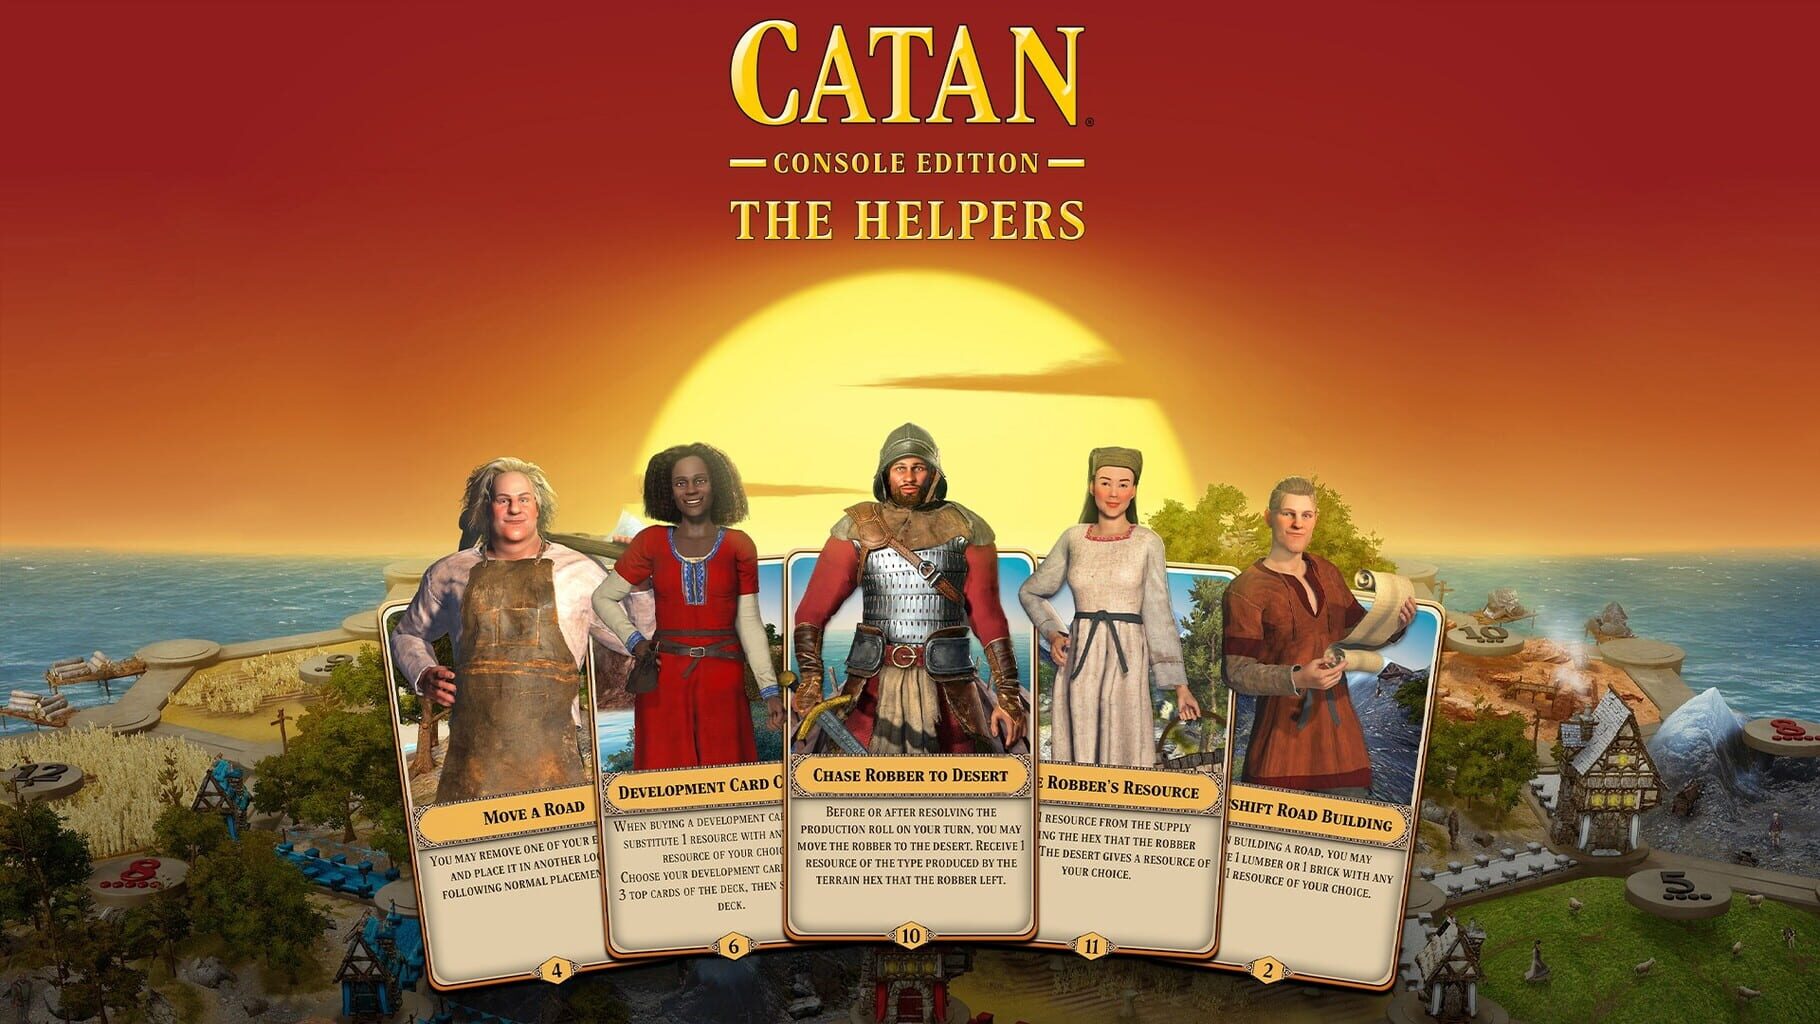 Catan: Console Edition - The Helpers artwork